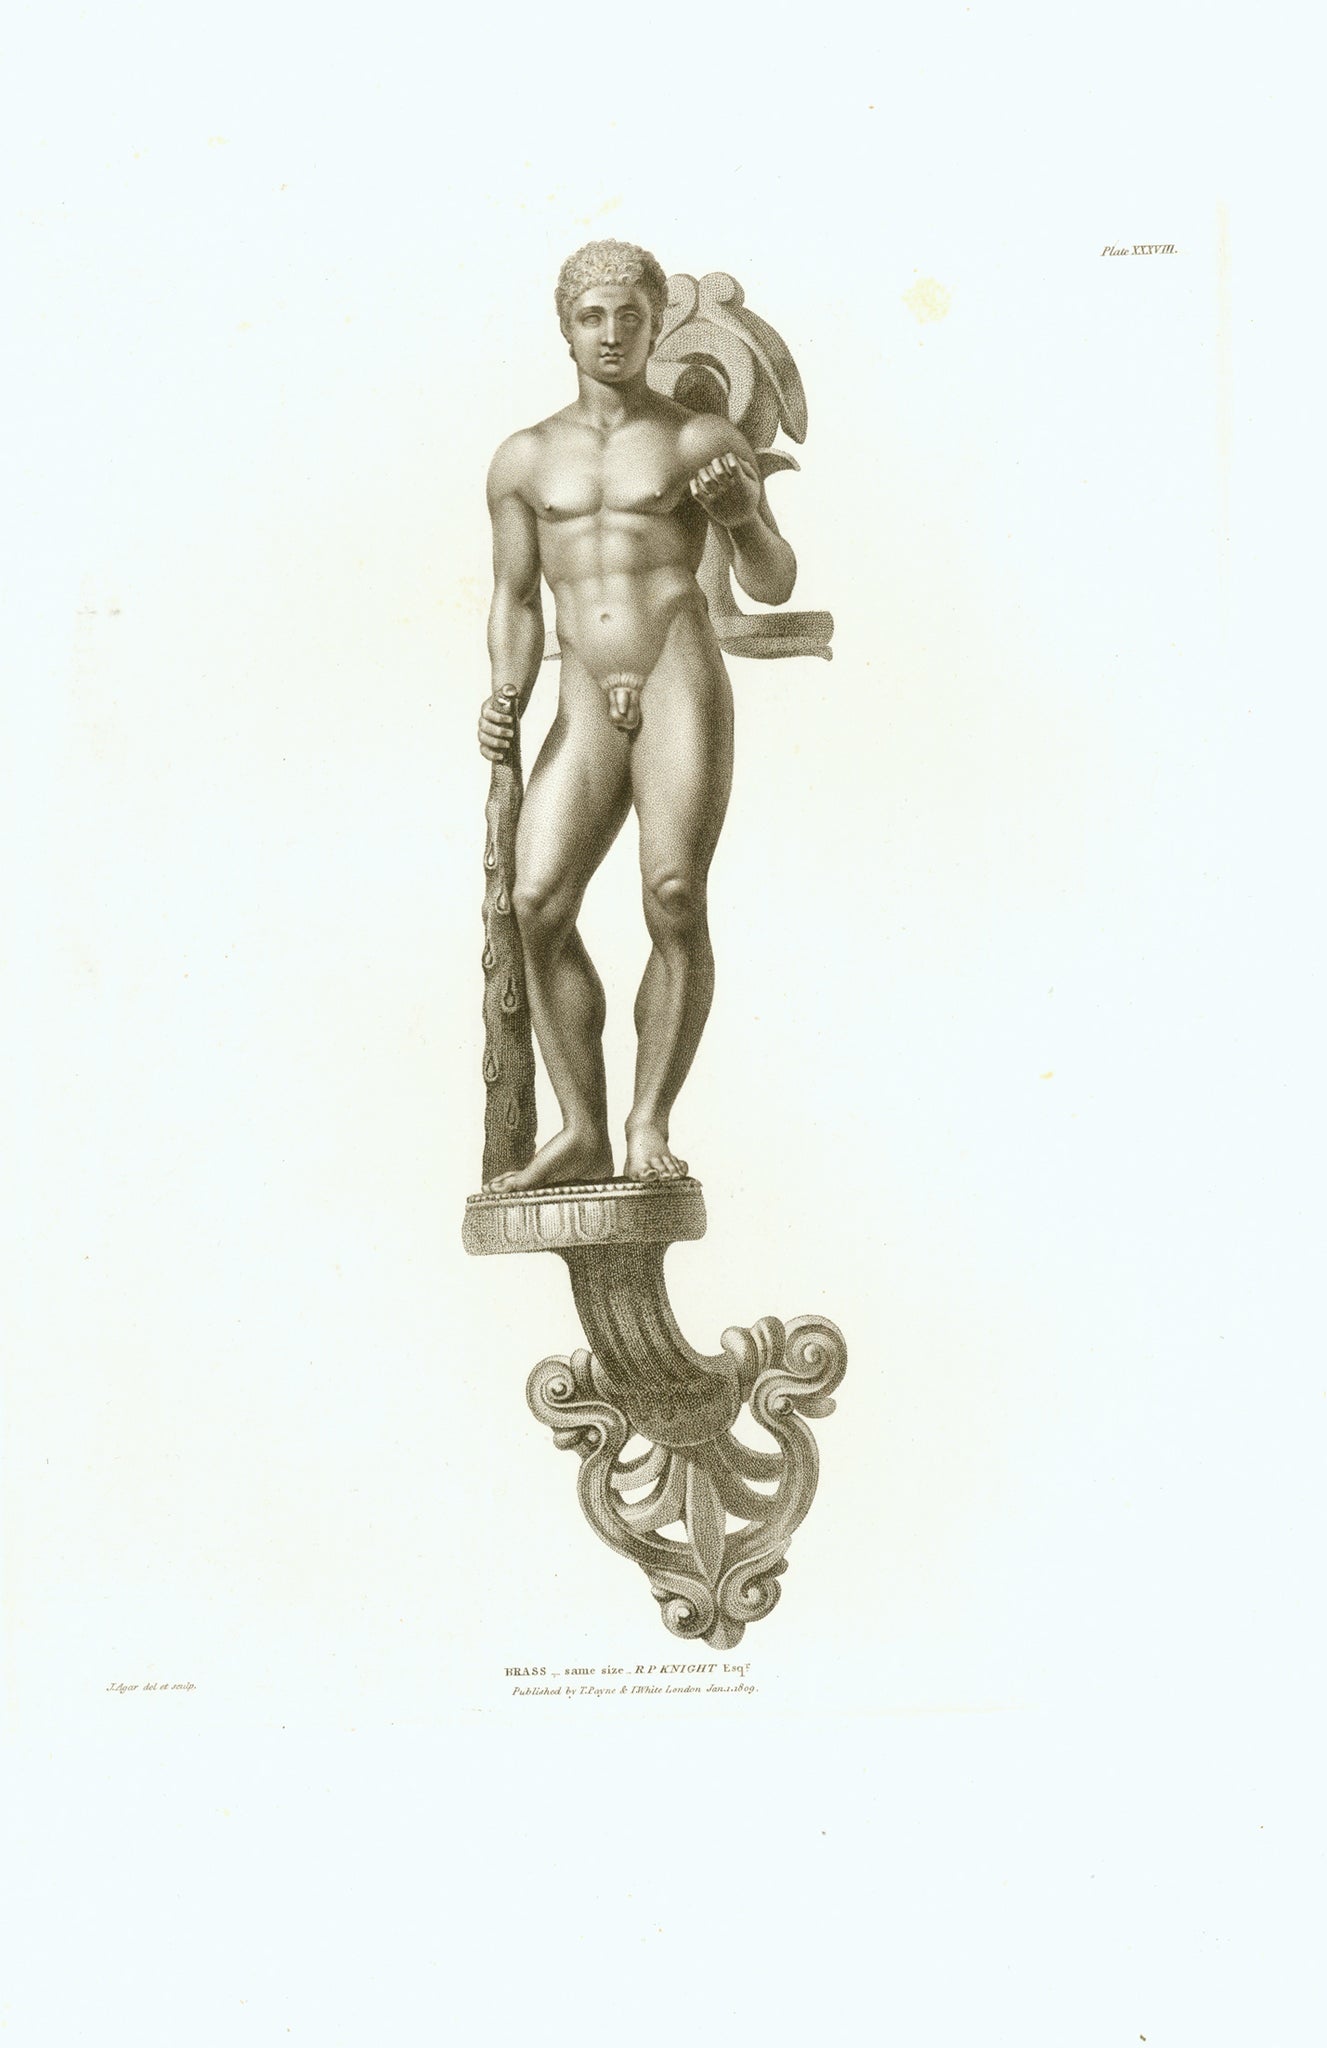 No Title. Hercules, holding the club in his right hand and the apple of the Hesperides in his left.  Brass - original size  Stipple engraving by John Samuel Agar (1773-1858)  After his own drawing.  Published in "Speciments of Ancient Sculpture, Aegyptian, Etruscan, Greek and Roman: Selected from different collections in Great Britain" Page XXXVIII  By Richard Payne Knight (1751-1824)  London, 1809  Agar's work as an engraver was hailed as "The finest ever made of Sculpture" (Nicholas Penny)